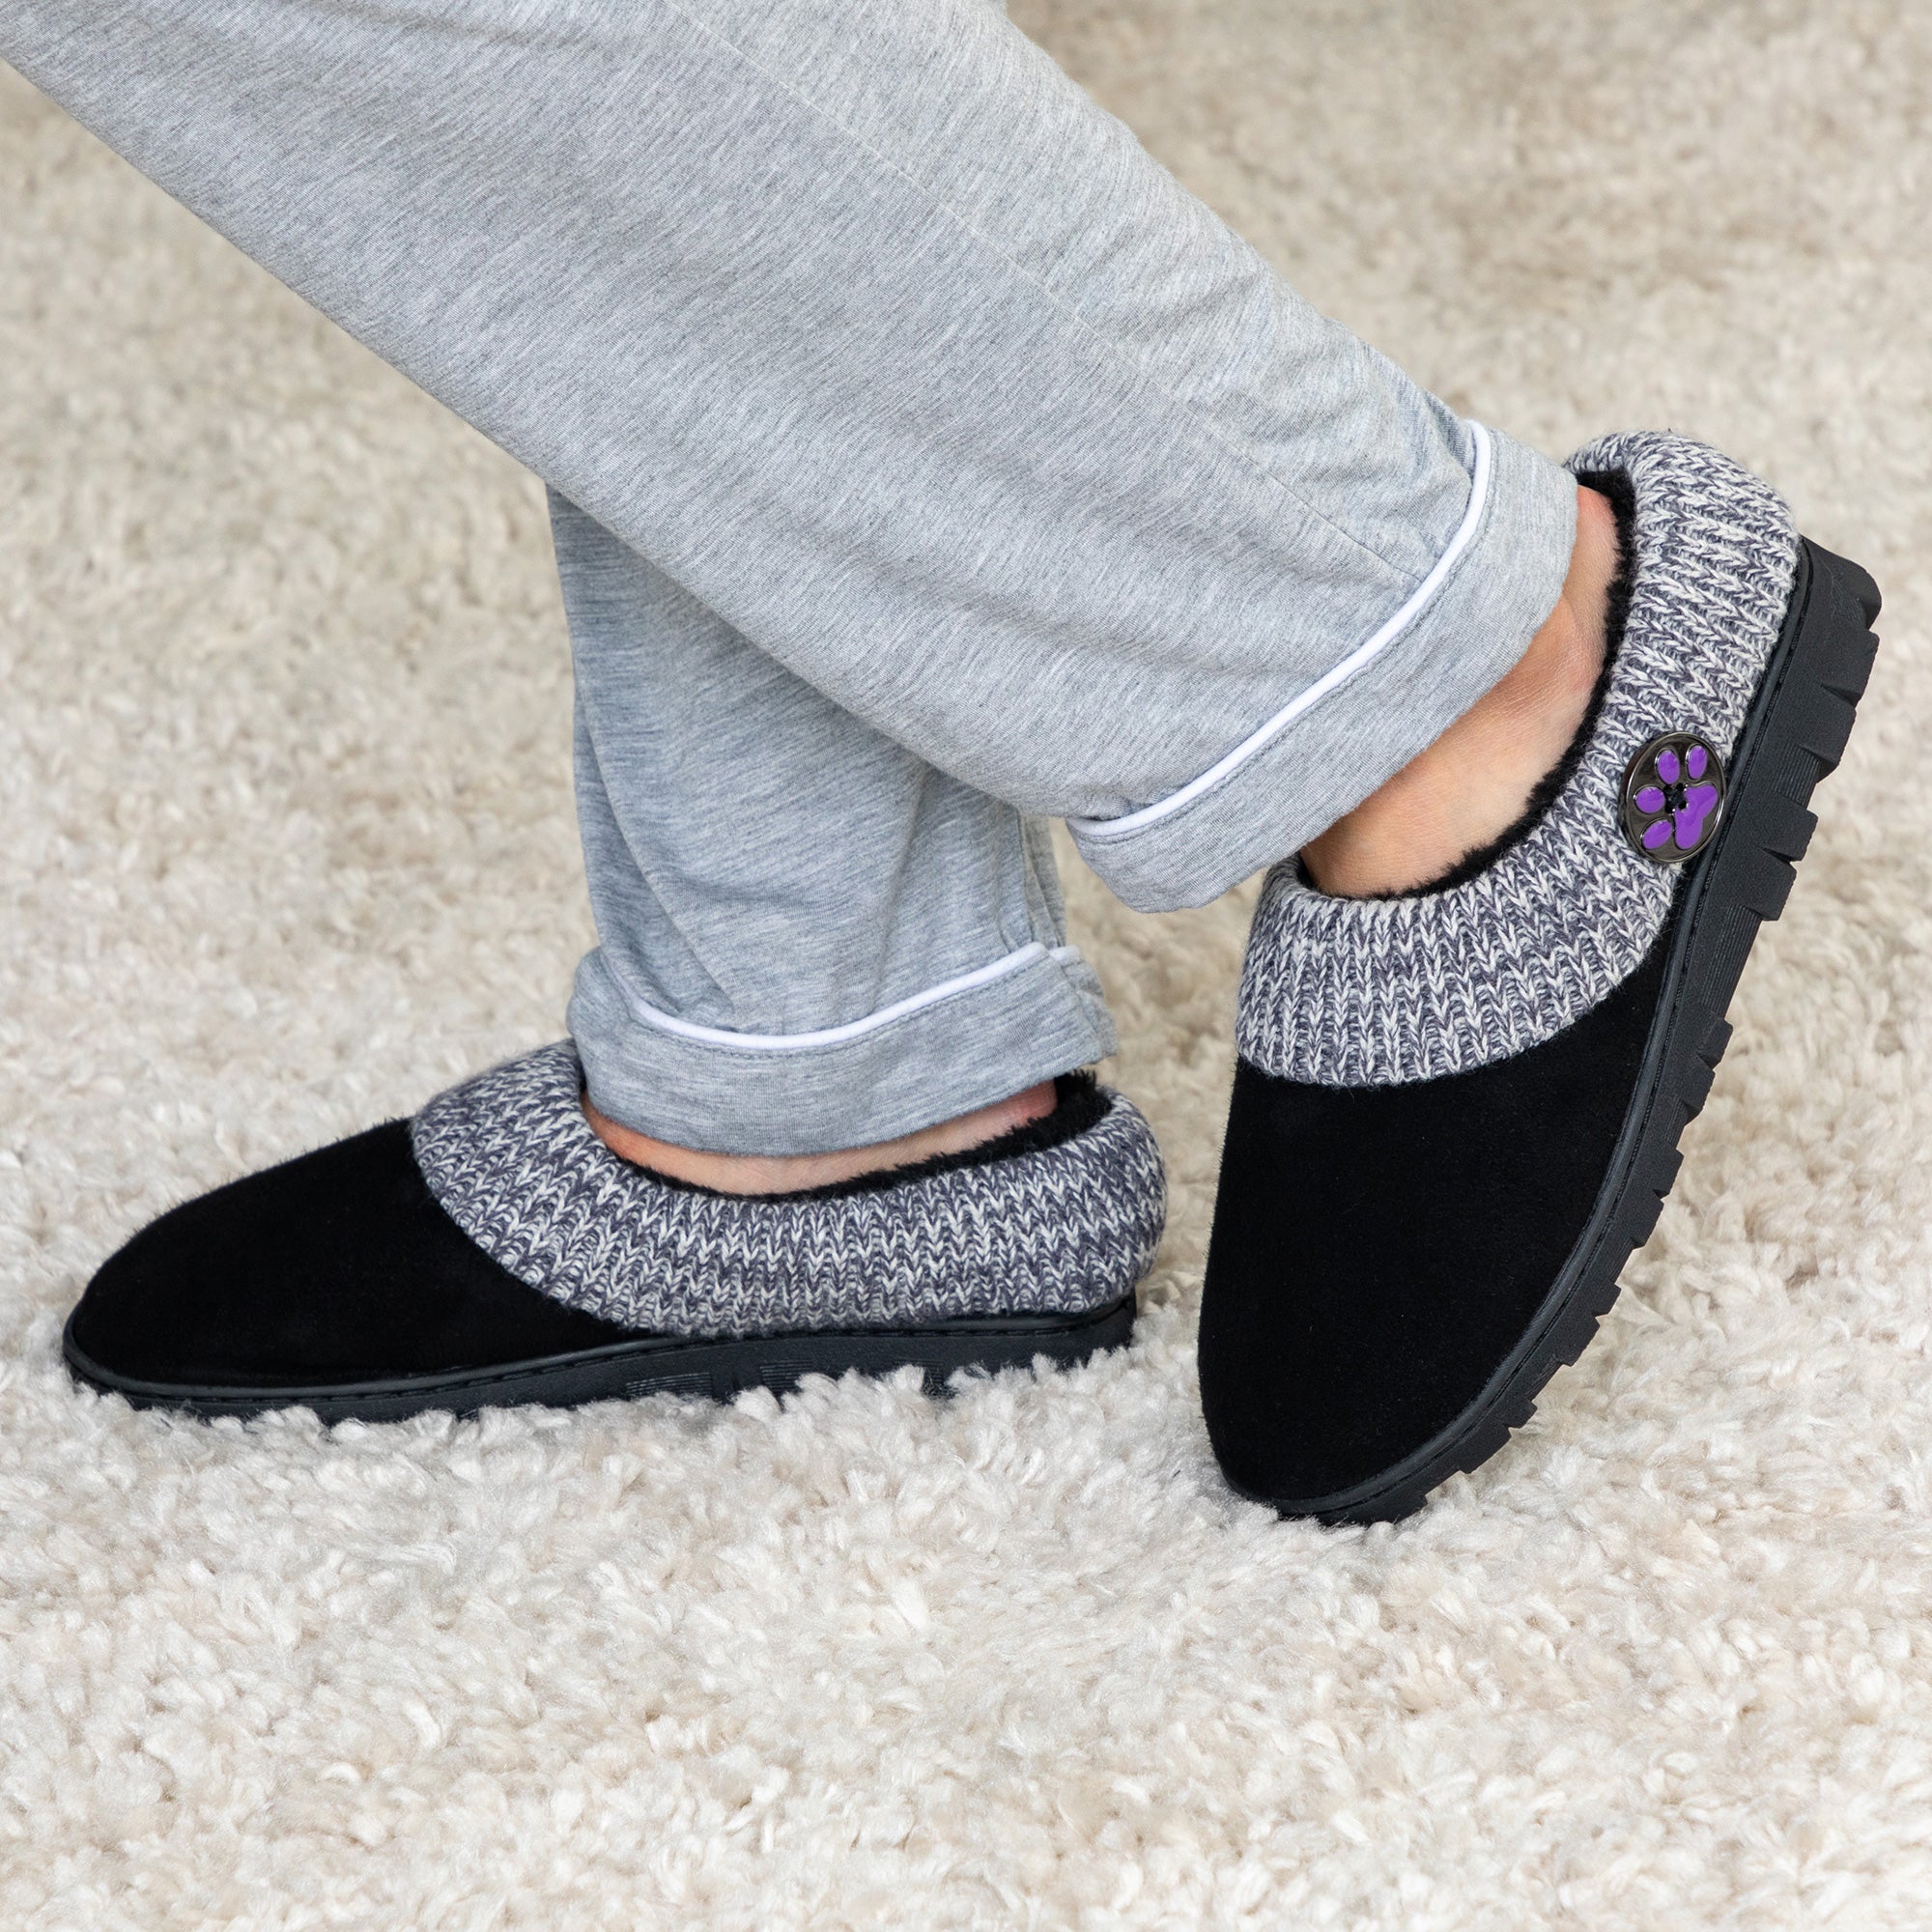 Purple Paw Comfy Clog Slippers